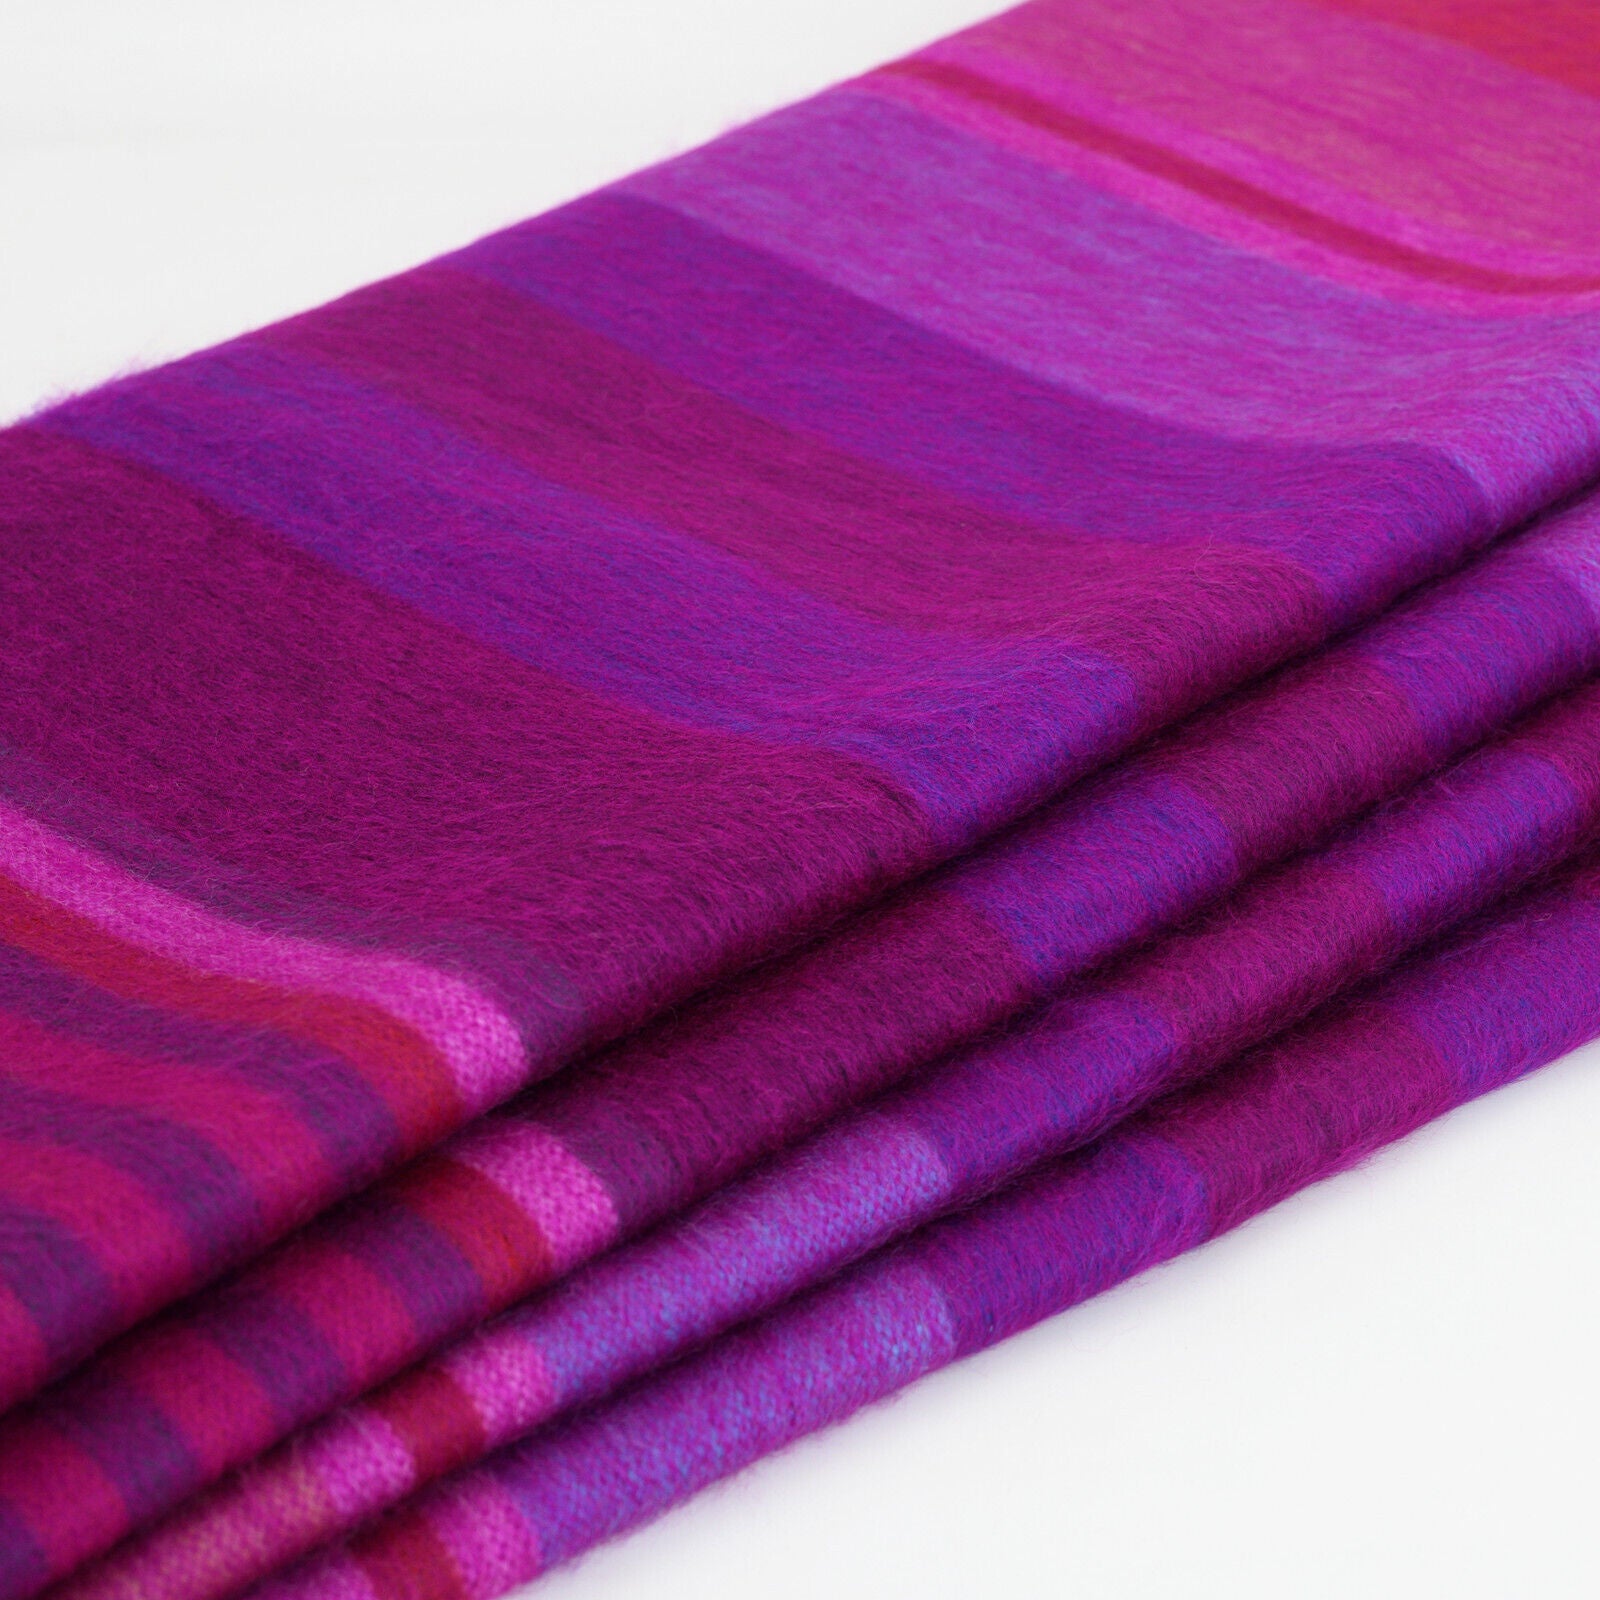 Chone - Baby Alpaca Wool Throw Blanket / Sofa Cover - Queen Size 97" x 69" - Vibrant Purples & Rich Pinks